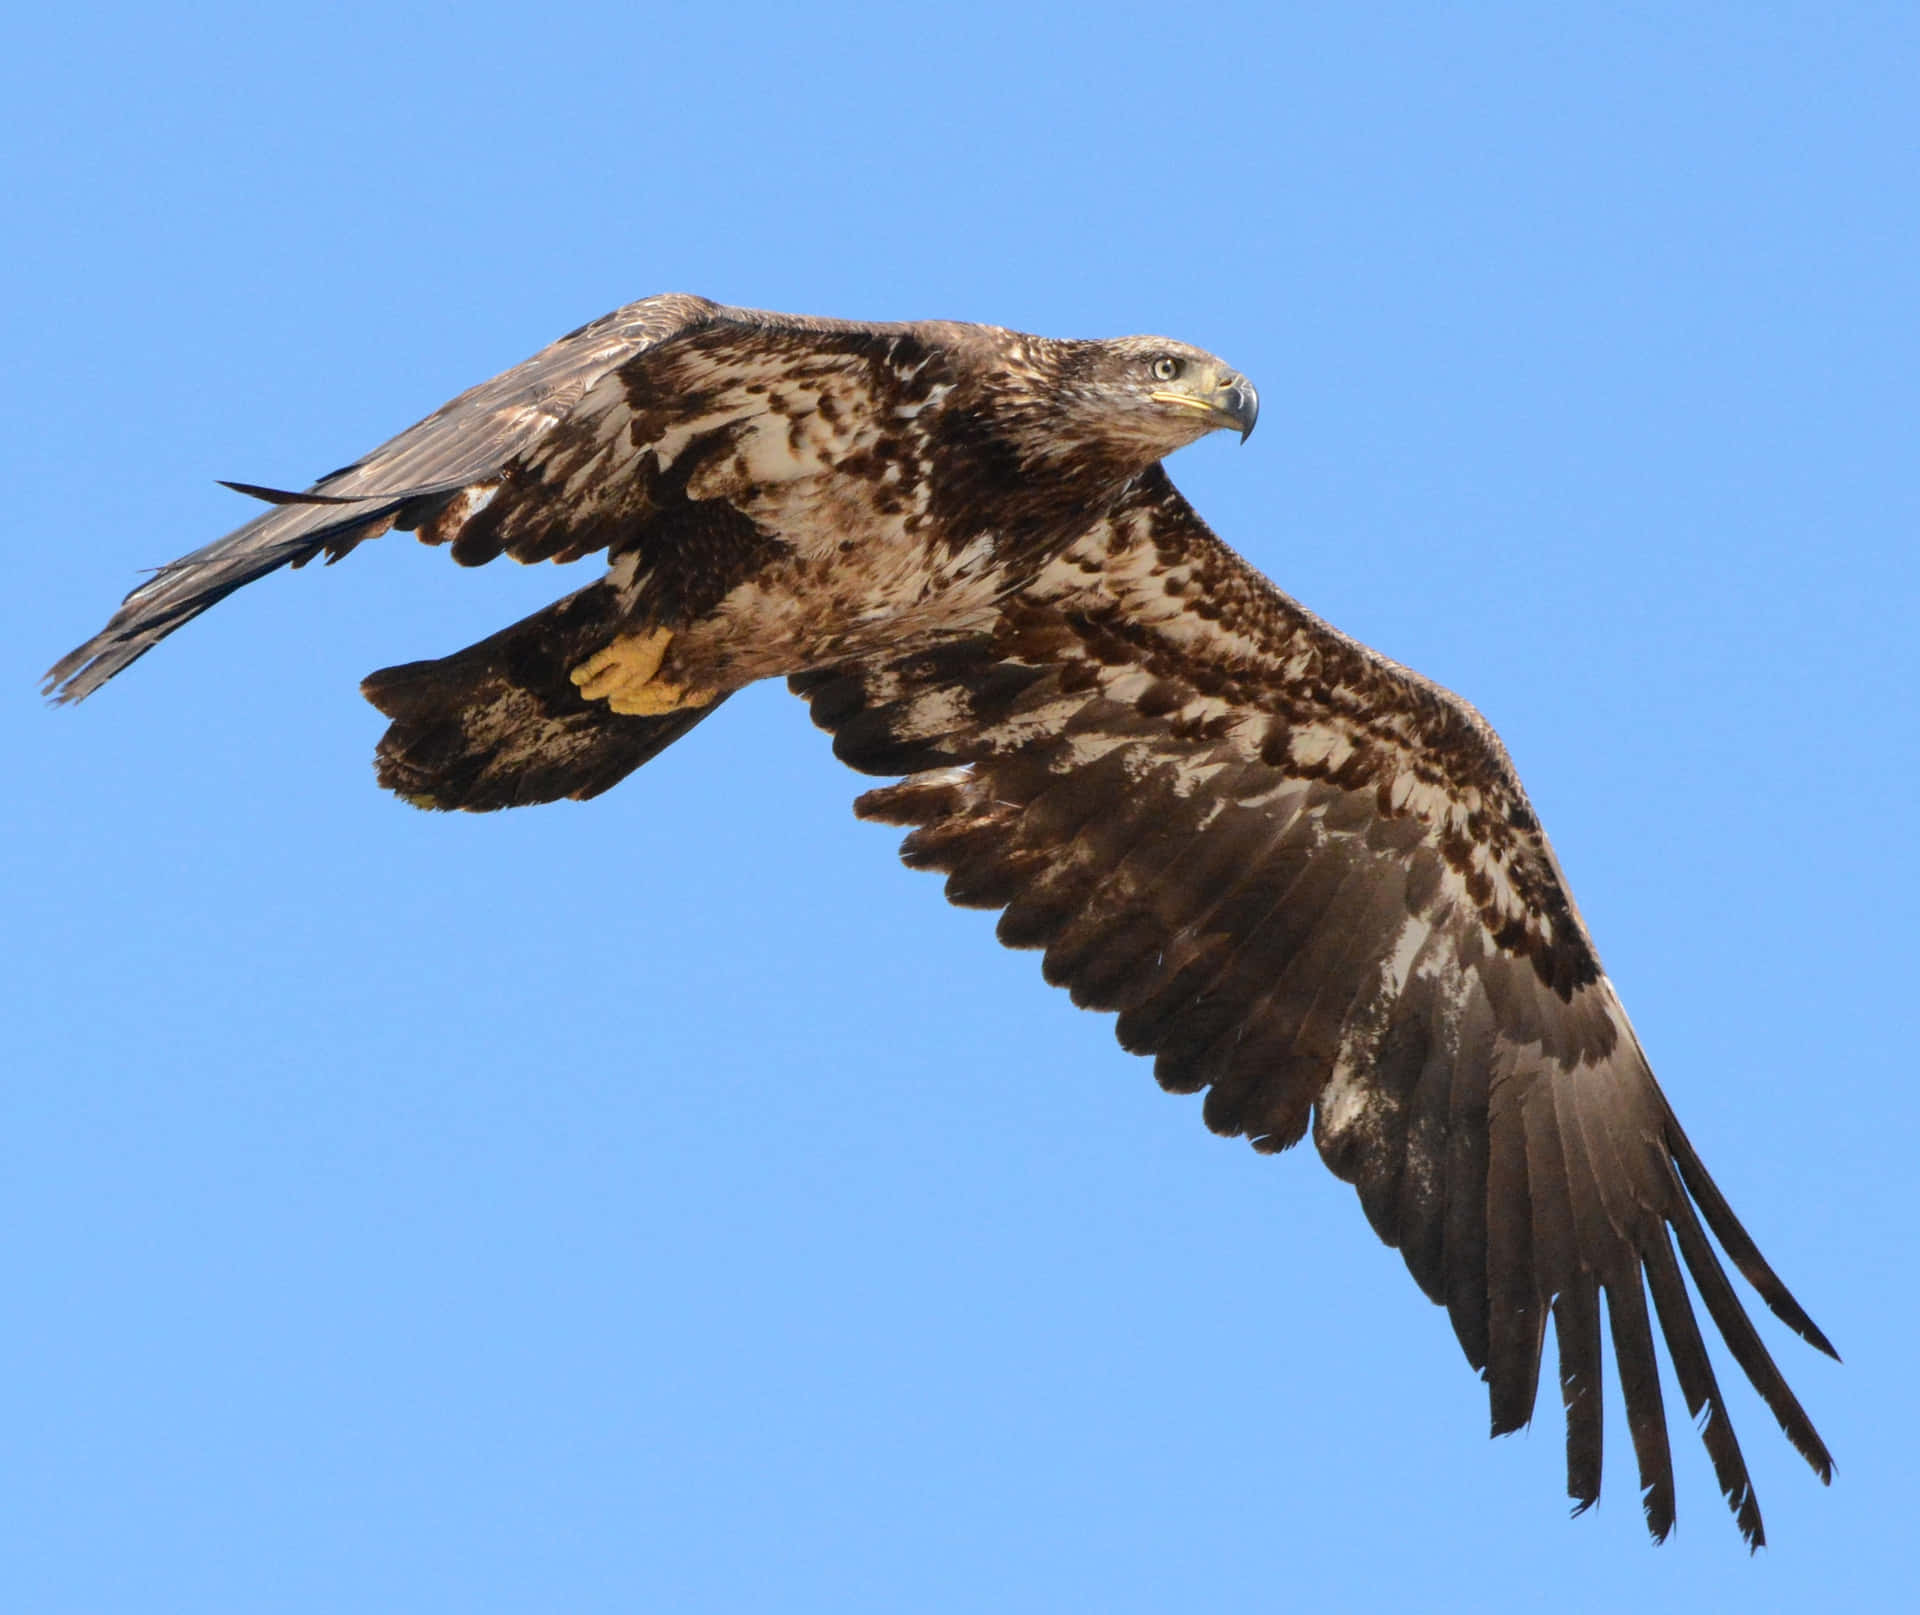 A young eagle soars overhead.